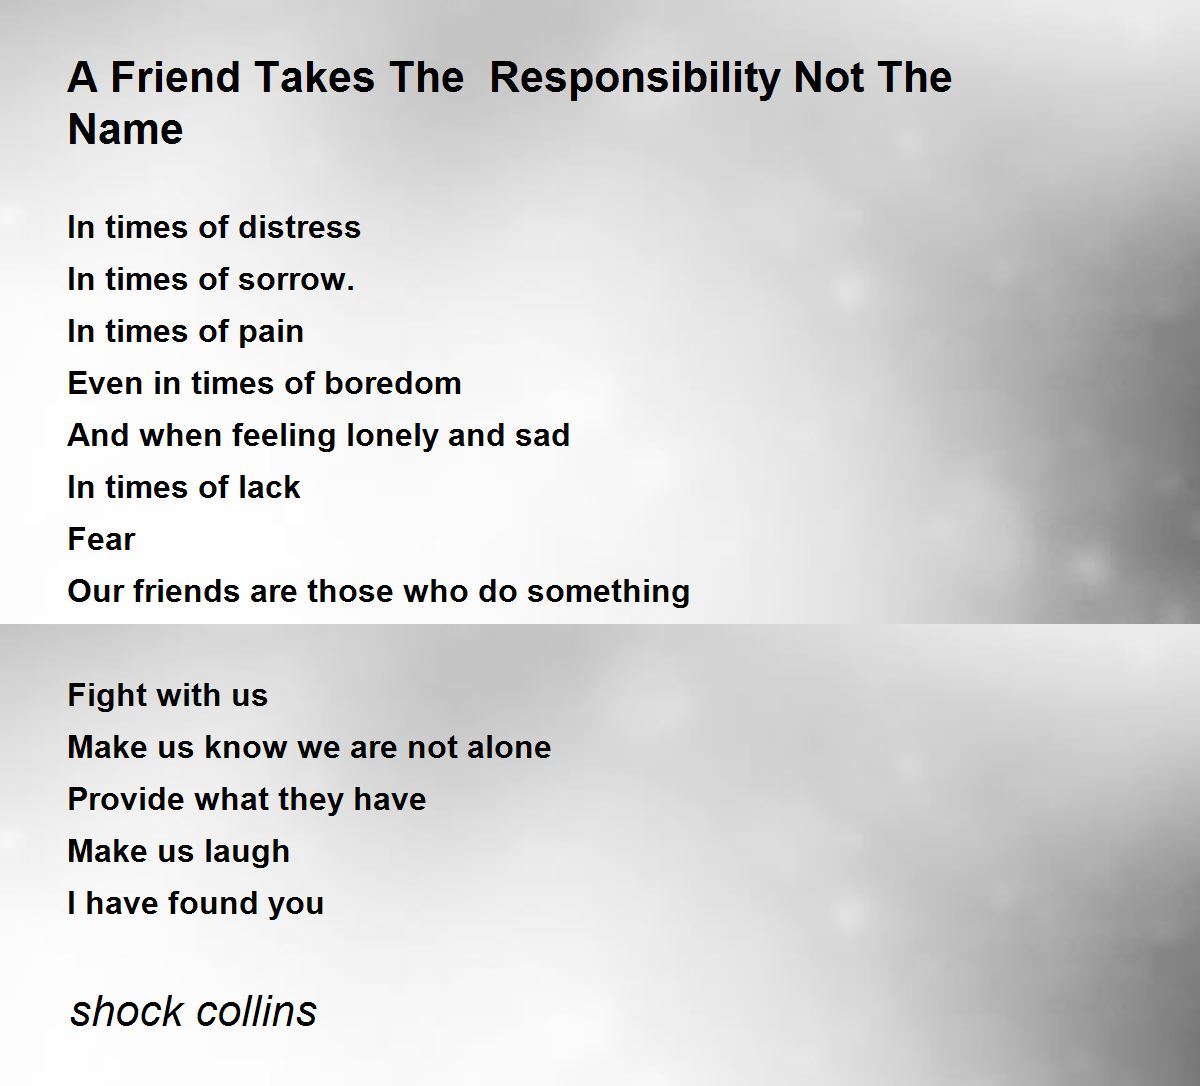 A Friend Takes The Responsibility Not The Name - A Friend Takes ...